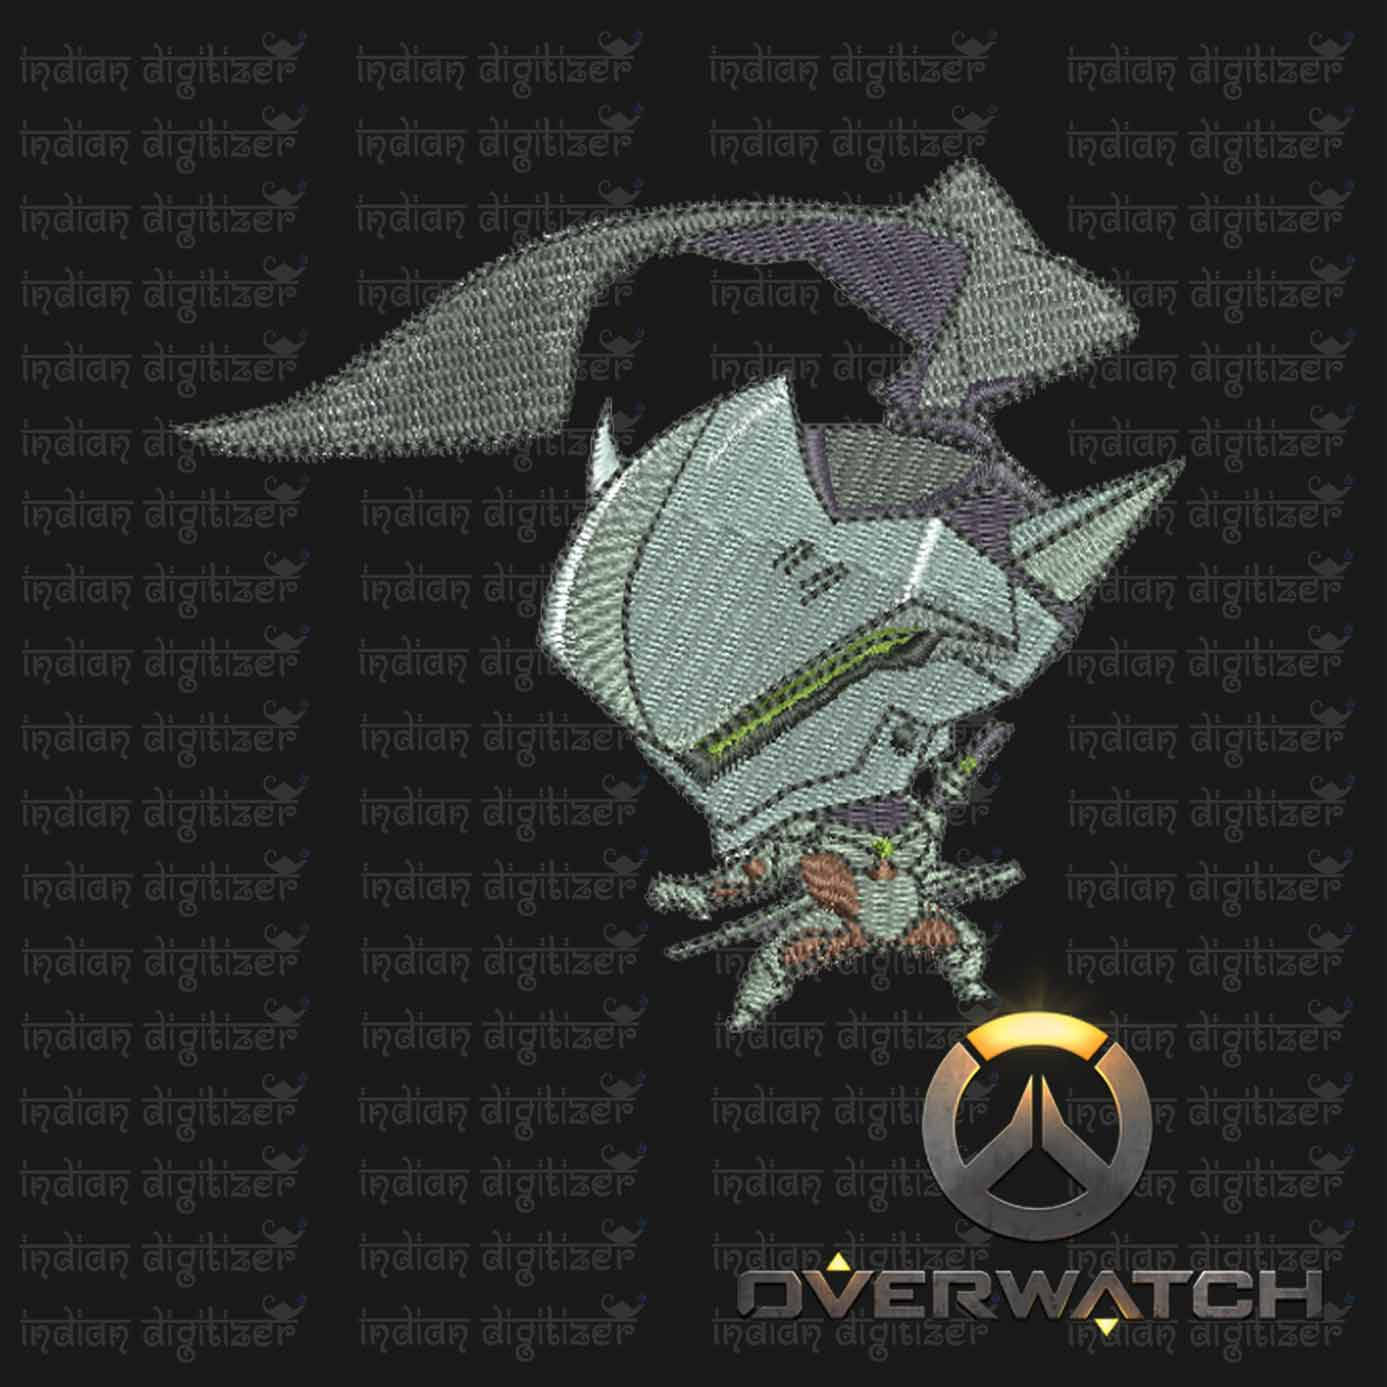 Overwatch Embroidery Designs - Genji individual character for 4x4in hoop - resizable with freely downloadable software.